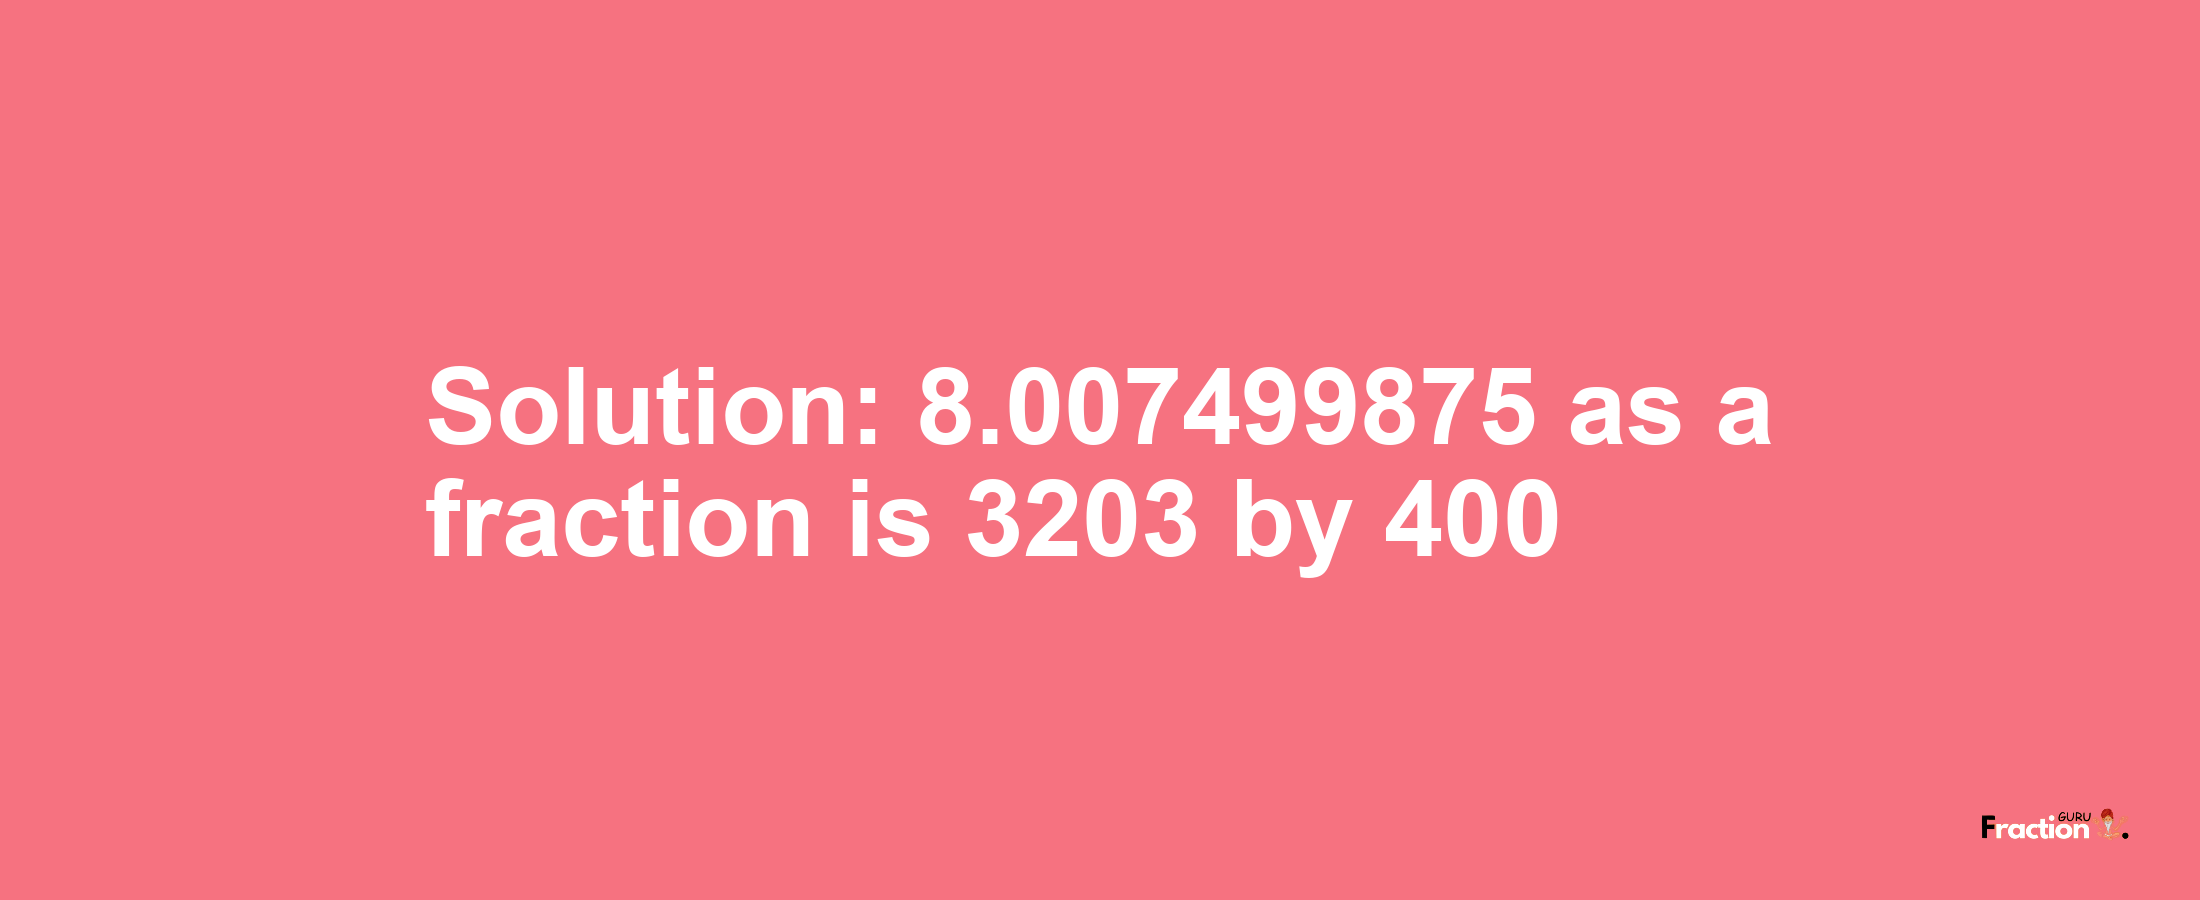 Solution:8.007499875 as a fraction is 3203/400